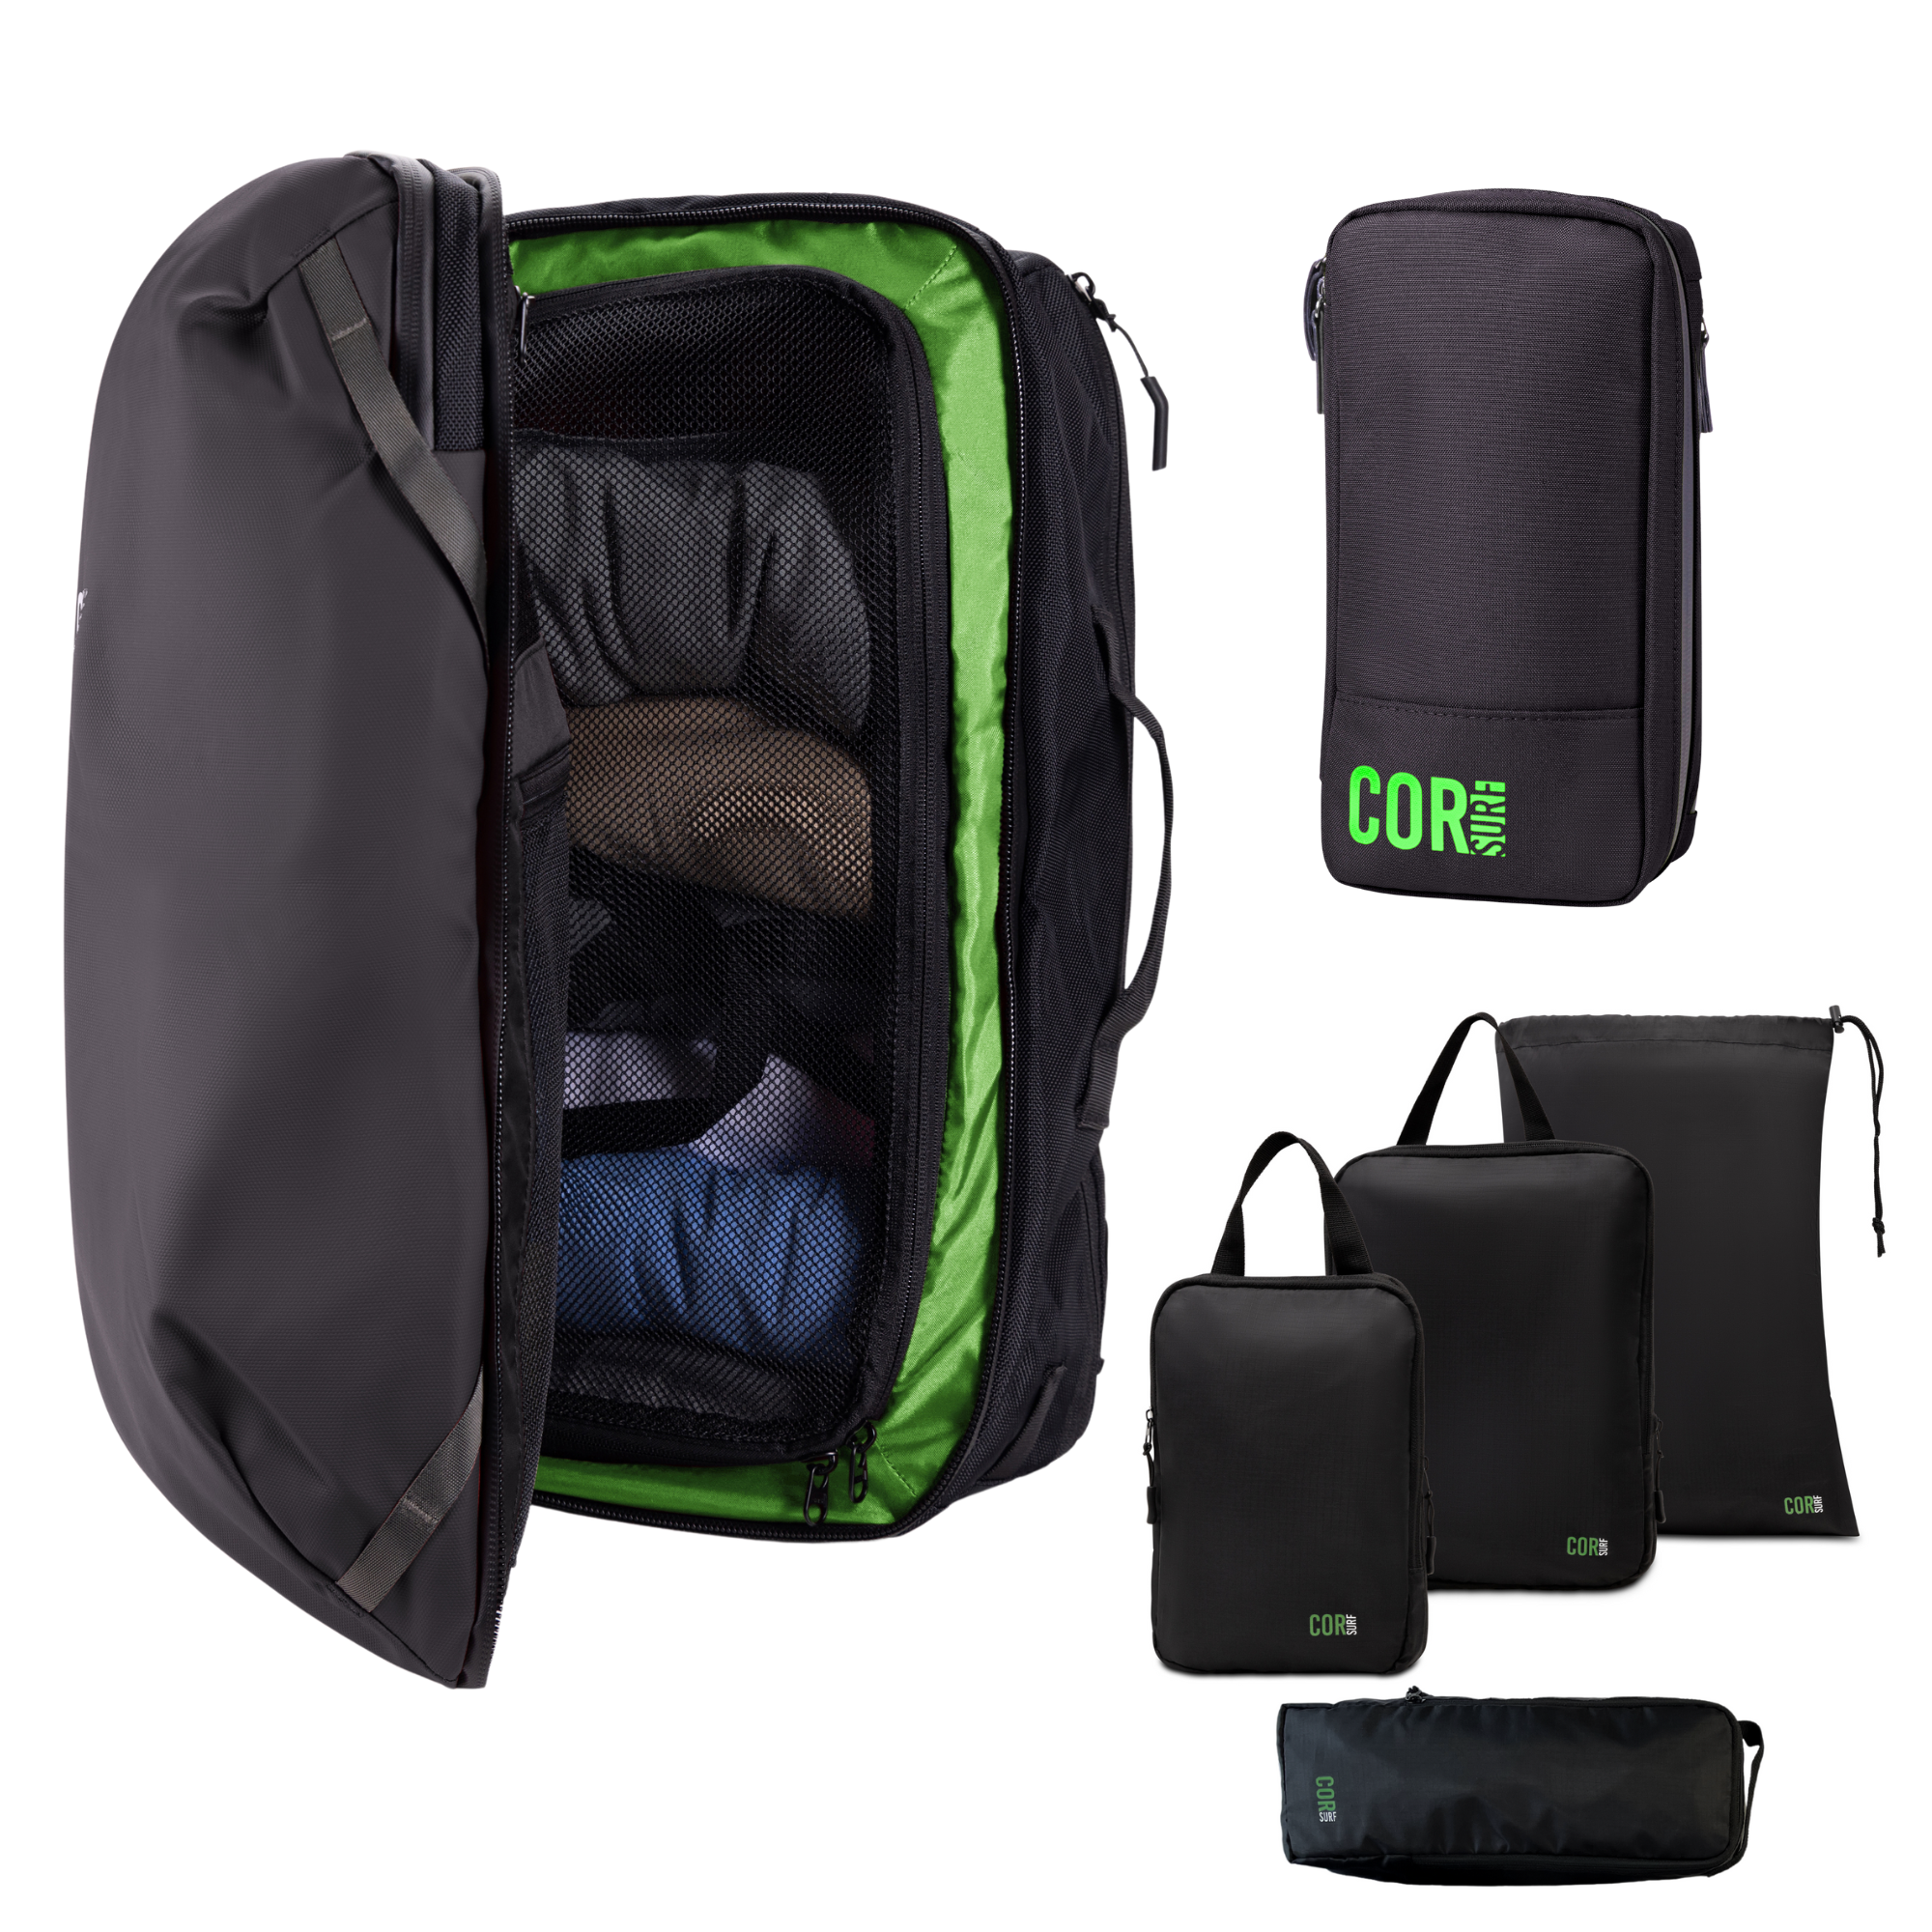 Island Hopper Travel Bundle - Backpack + Toiletry Bag + Compression Packing Cubes with YKK